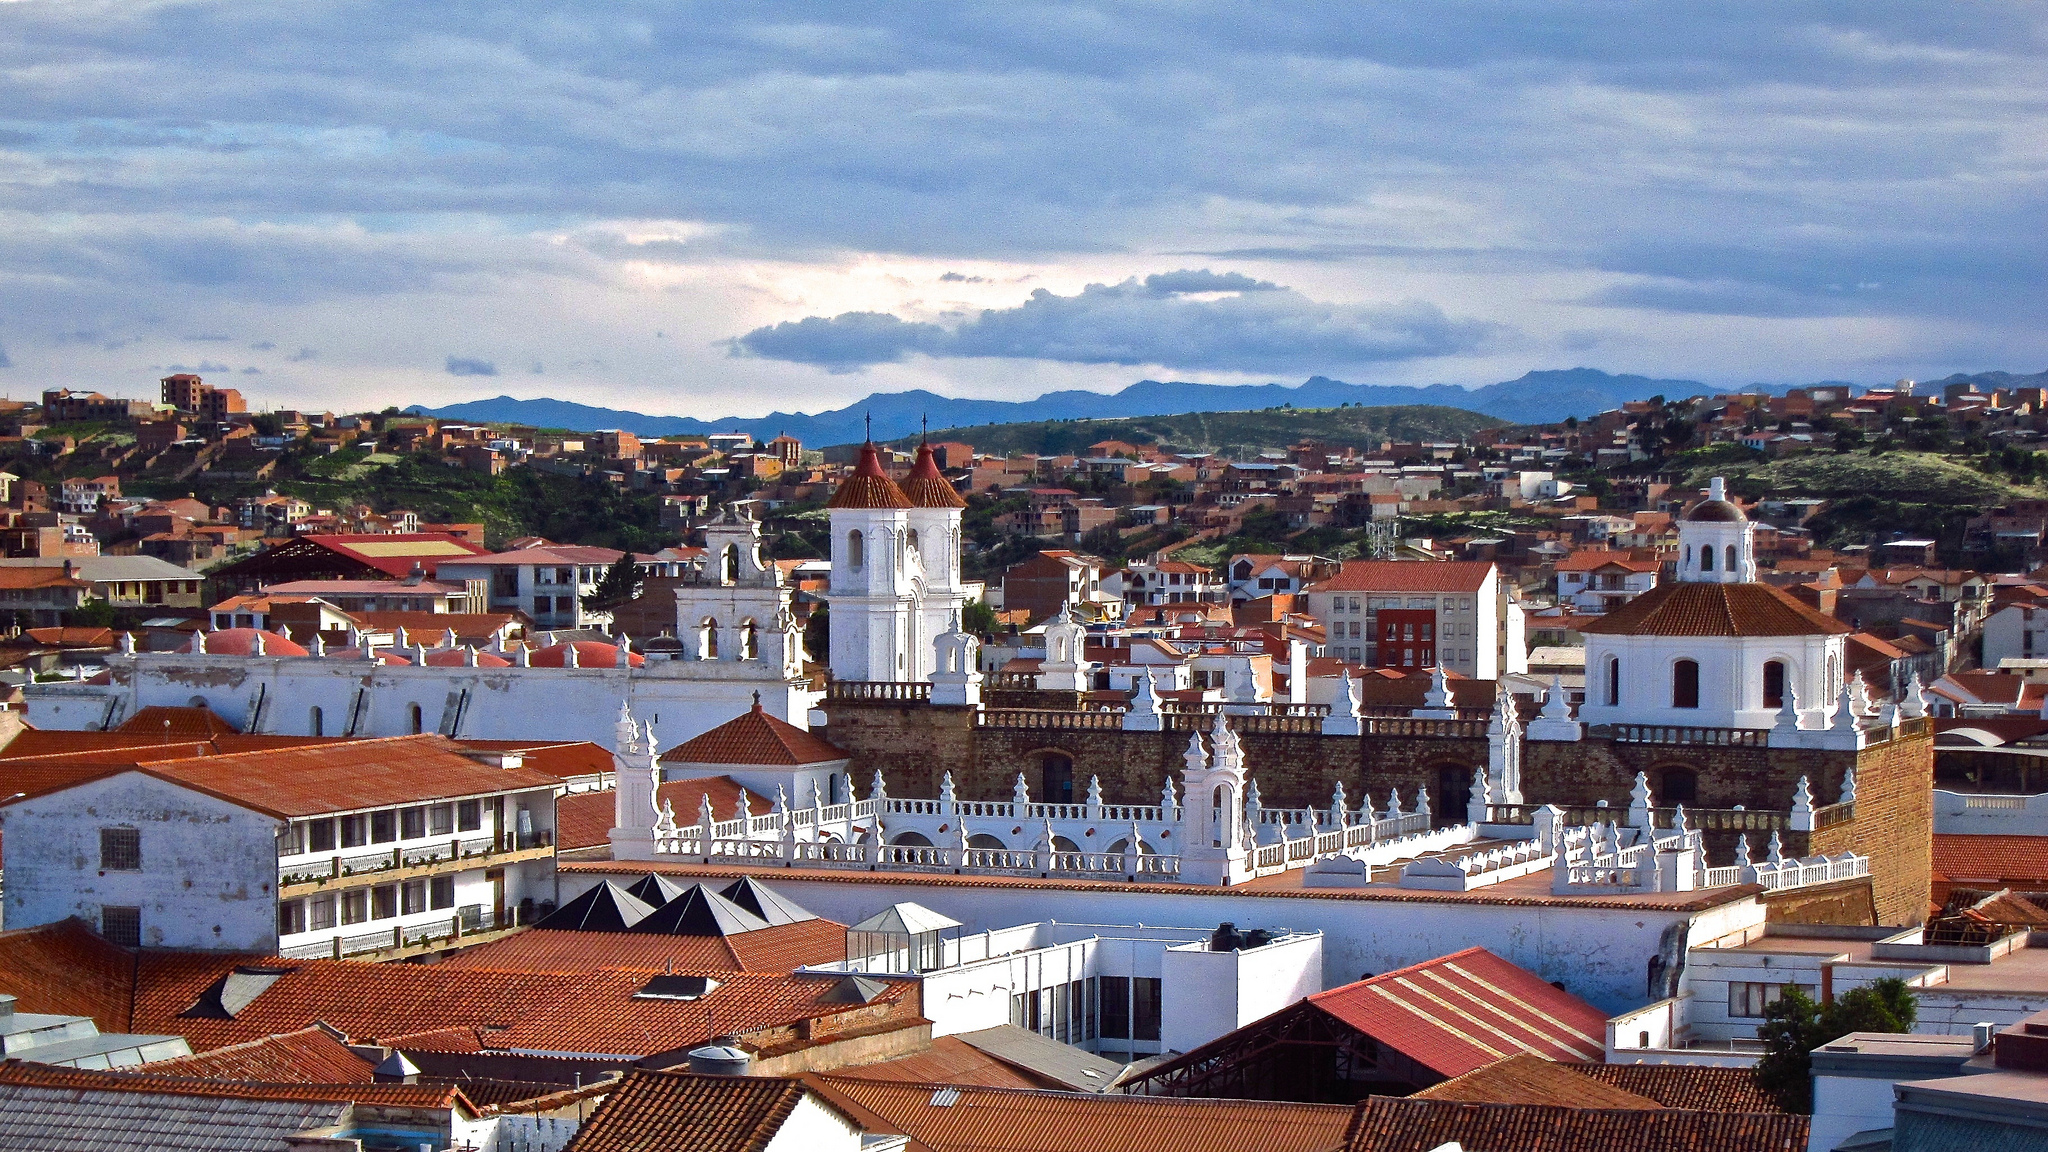 Featured Historic City of Sucre